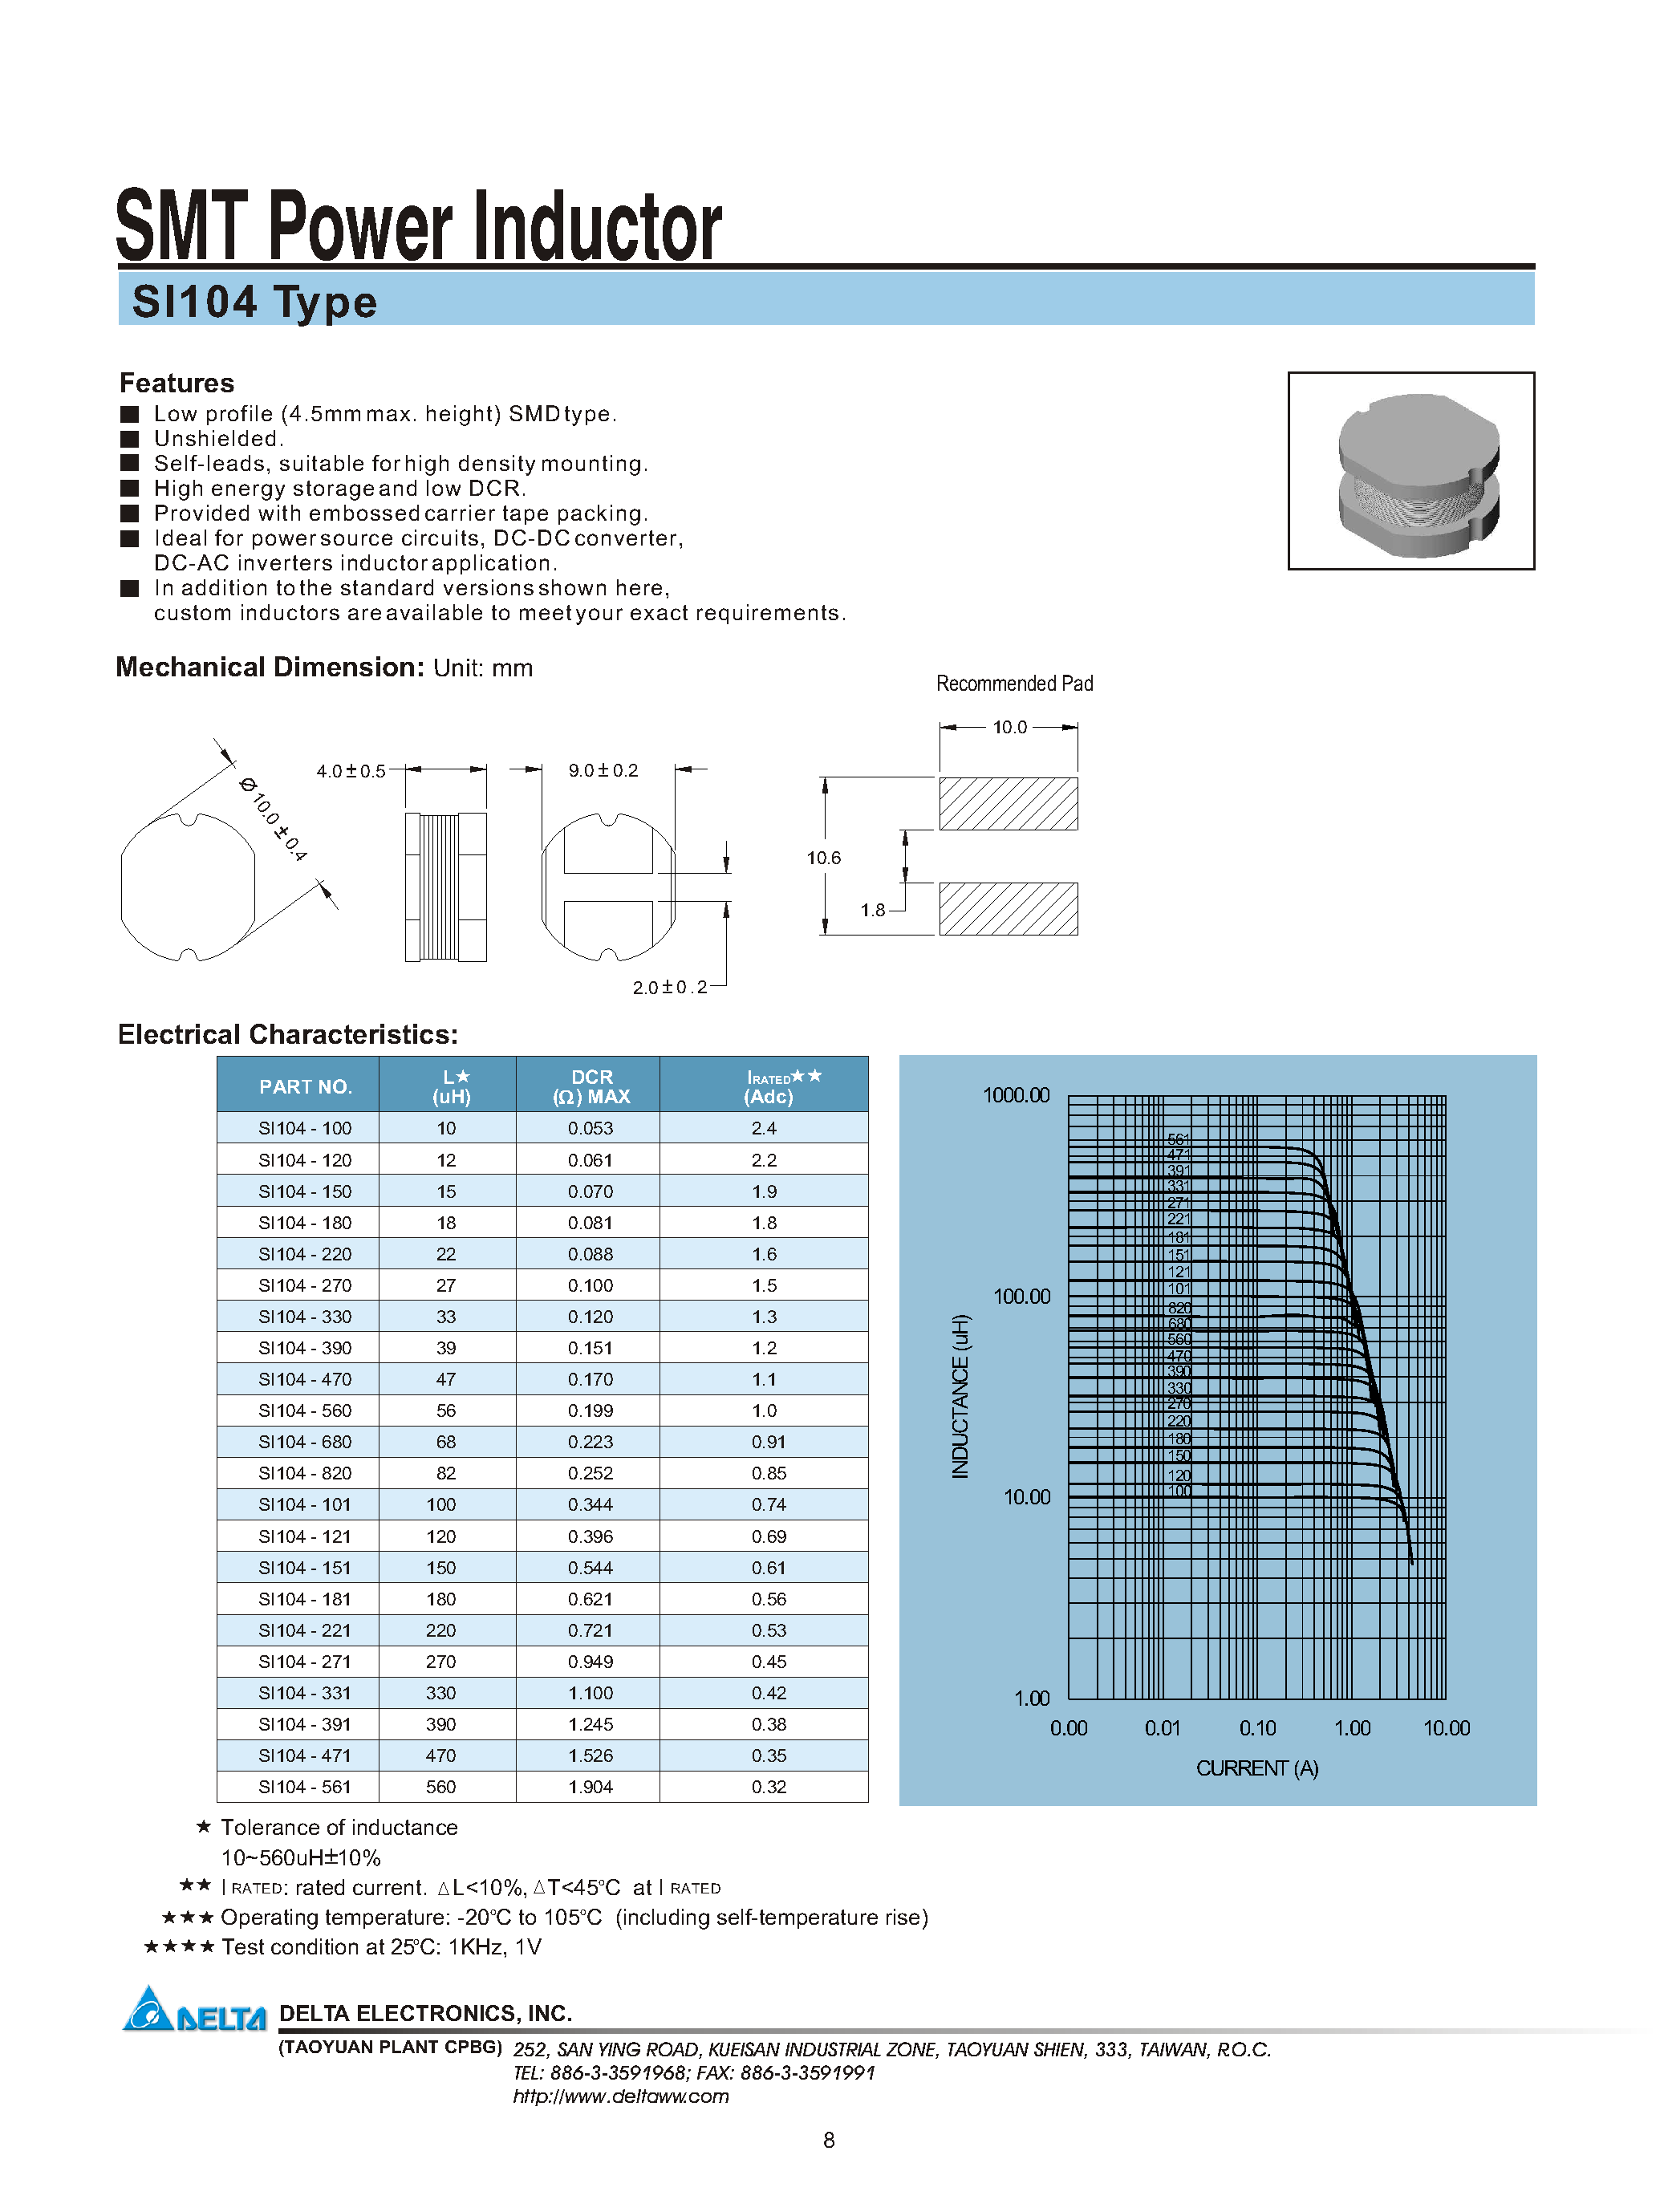 Datasheet SI104-101 - SMT Power Inductor page 1